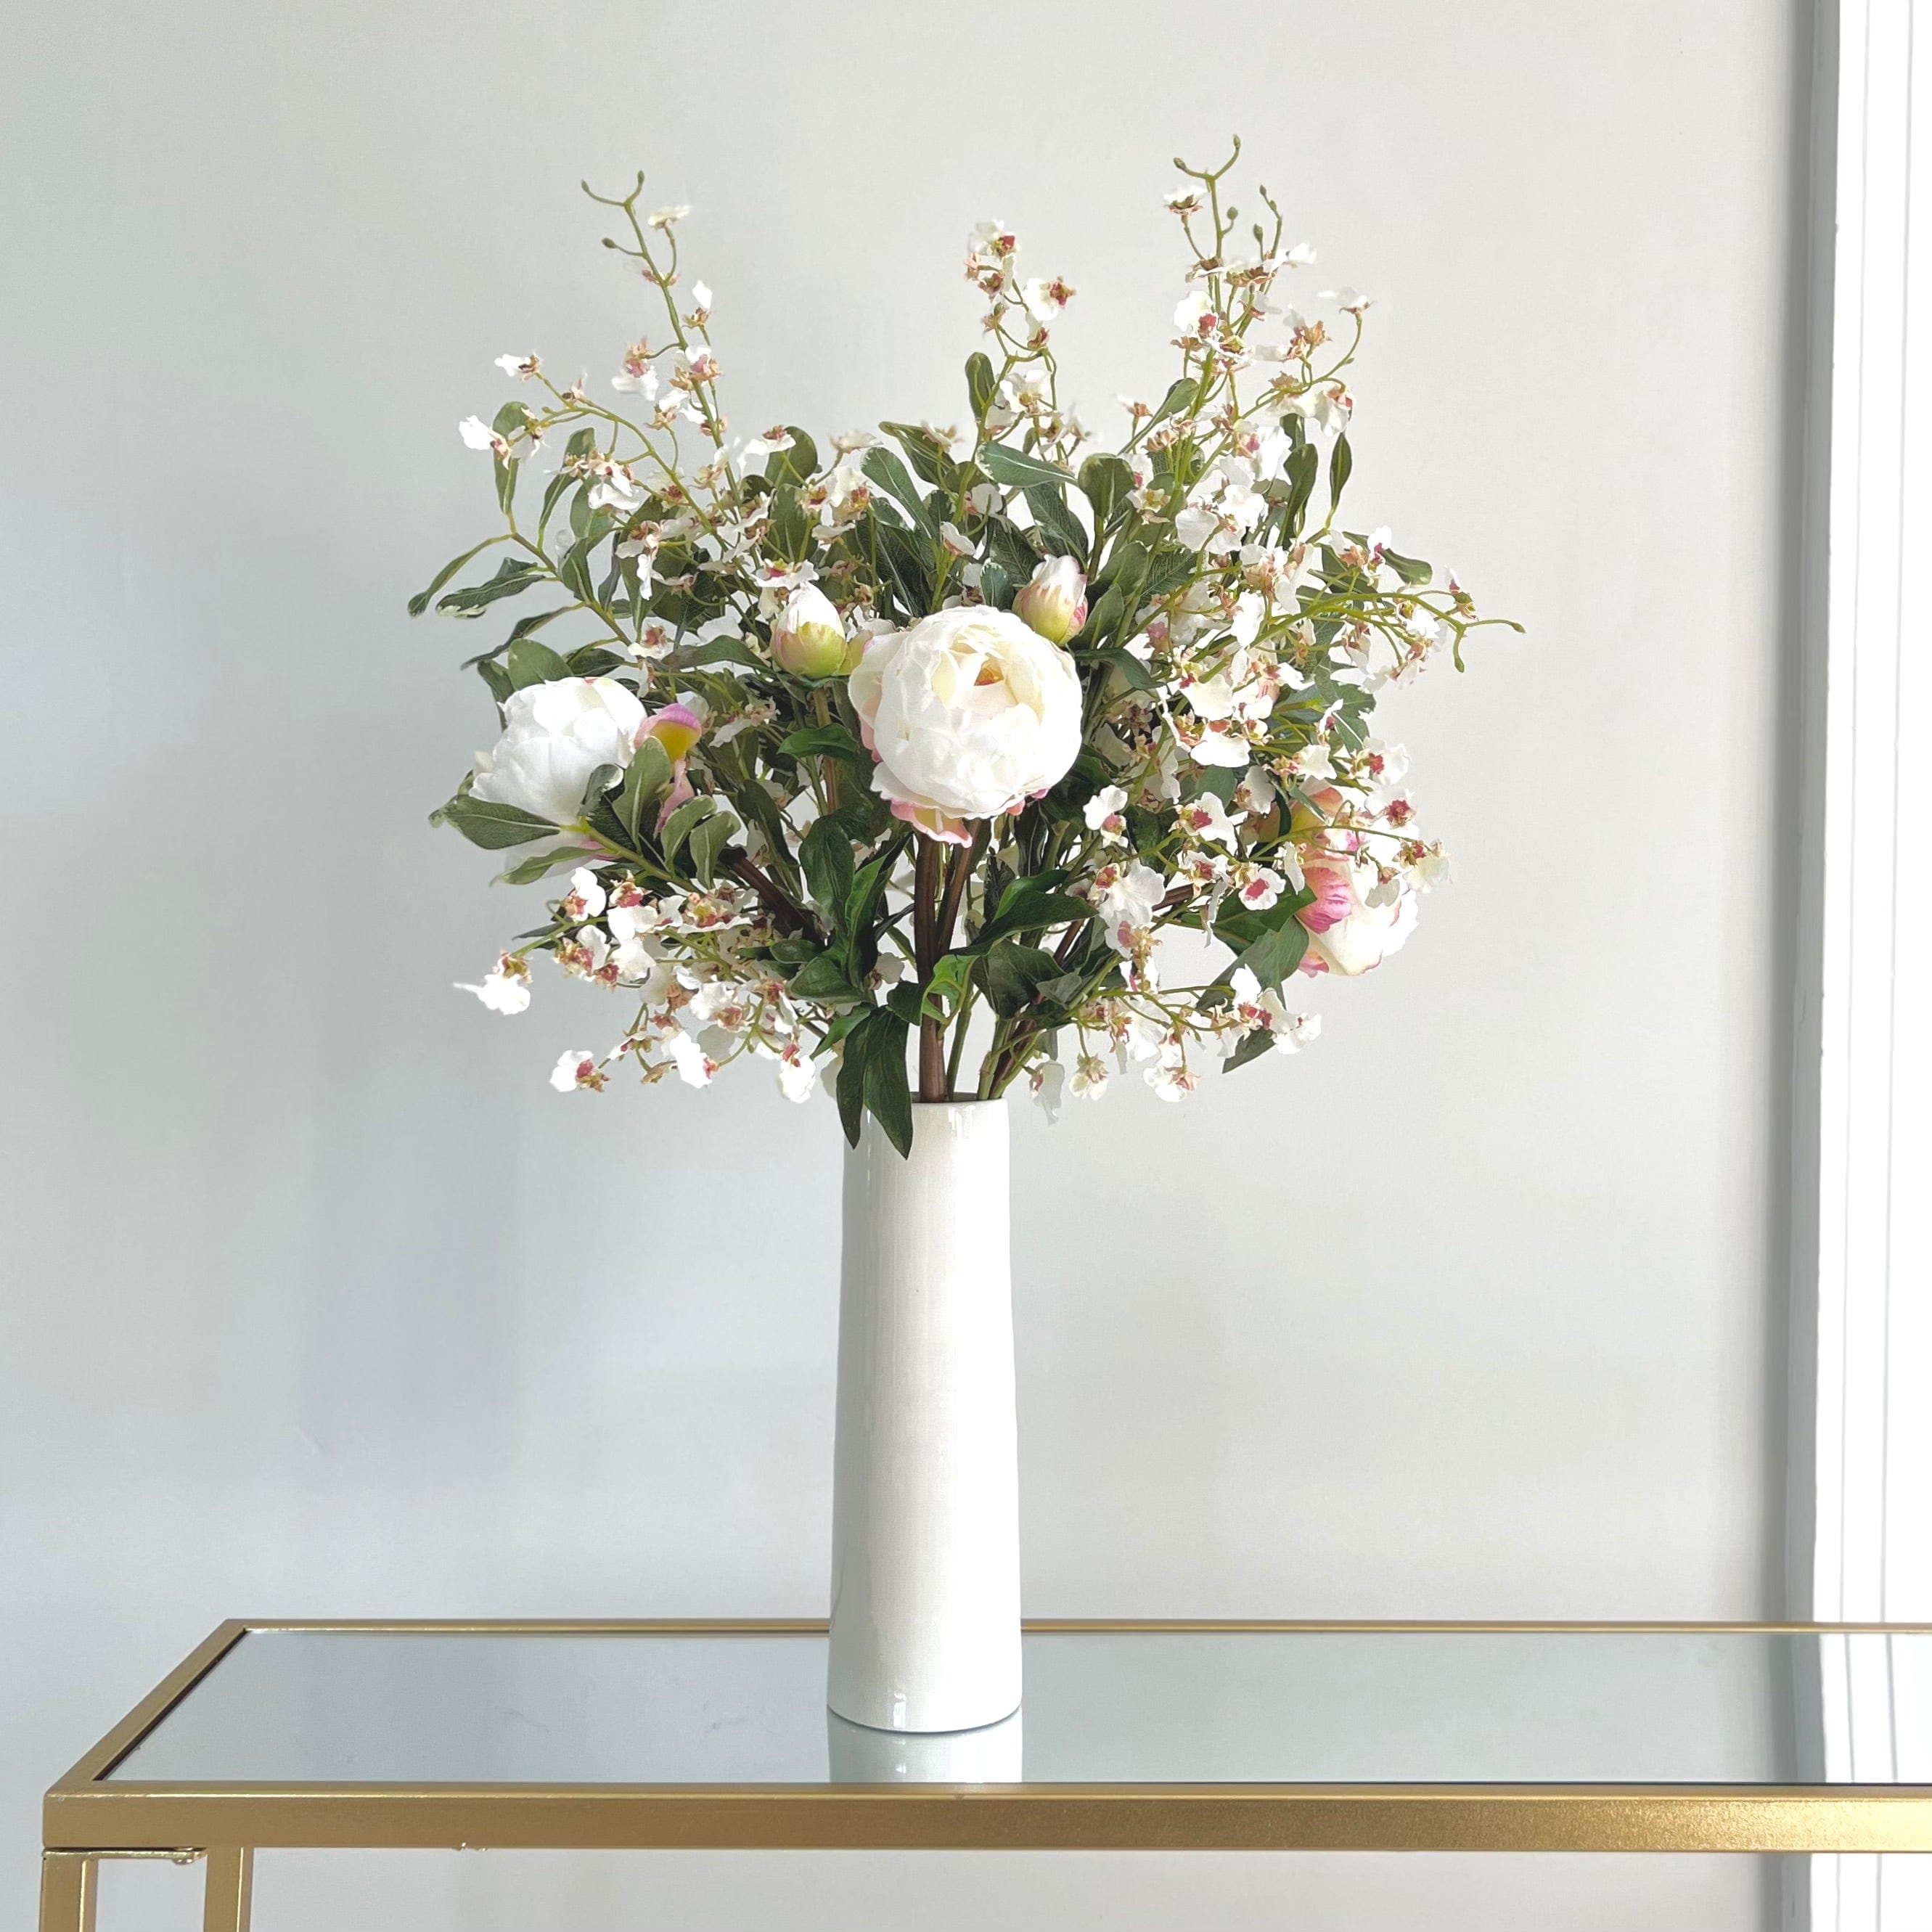 Artificial Flowers in Vase Stylish Vases White Prestbury Vase Home Decor and Accessories The Faux Flower Company UK ABP1828